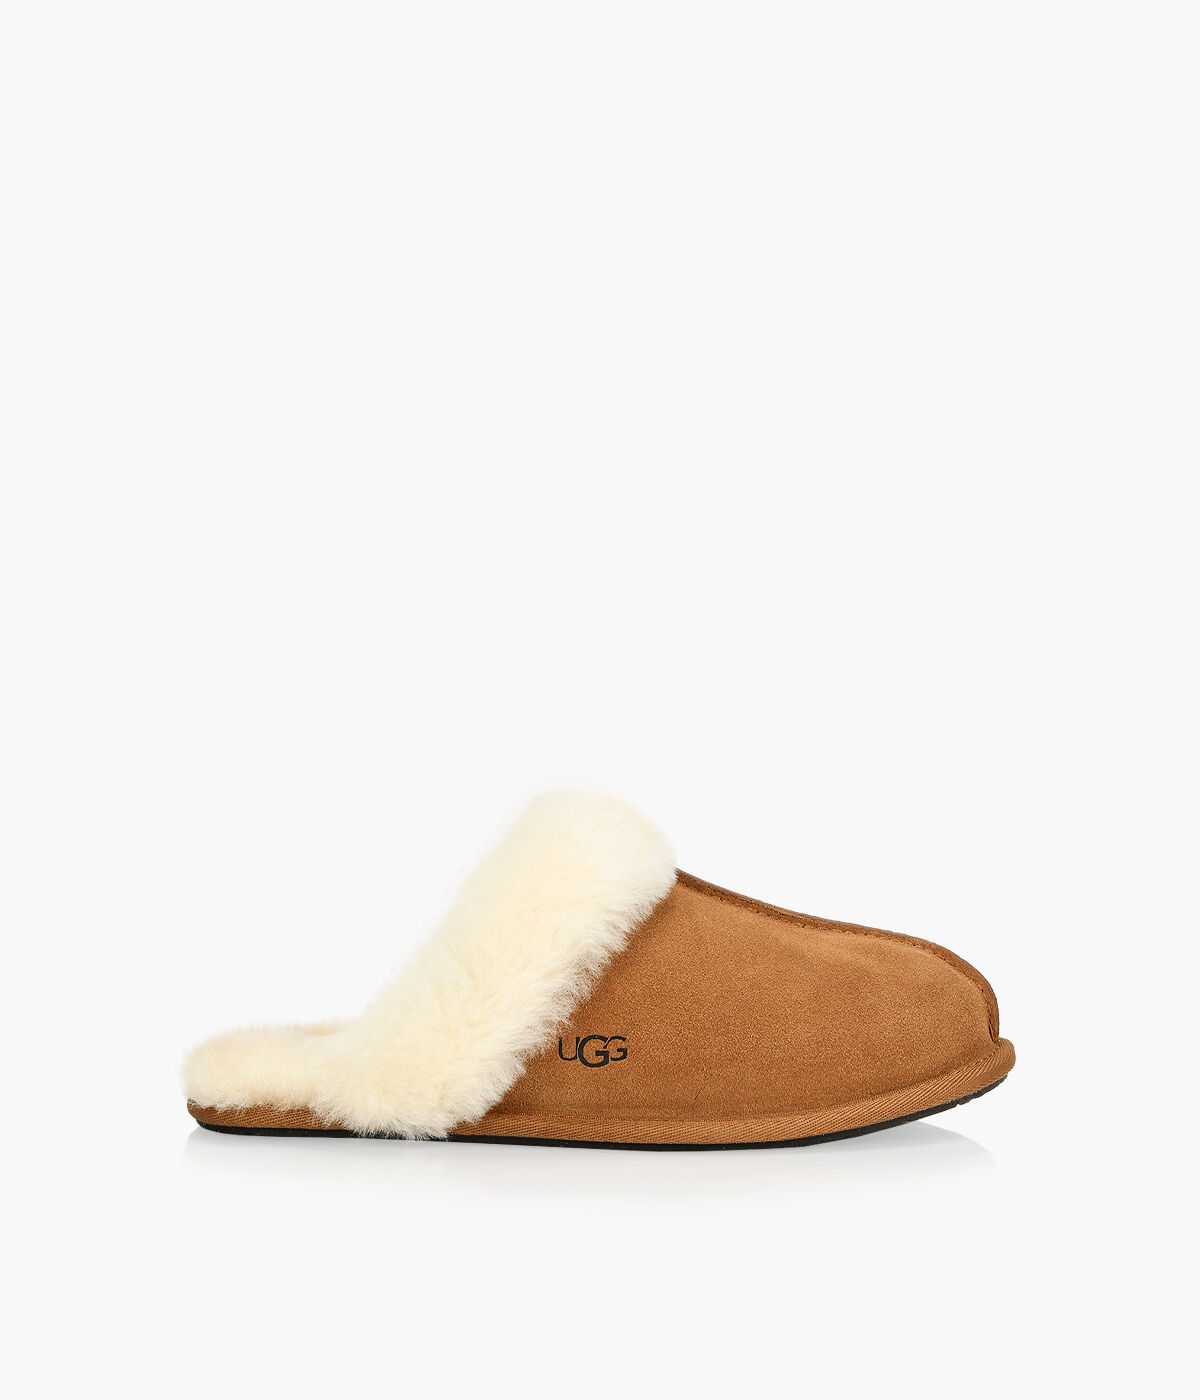 kids ugg slippers size 4